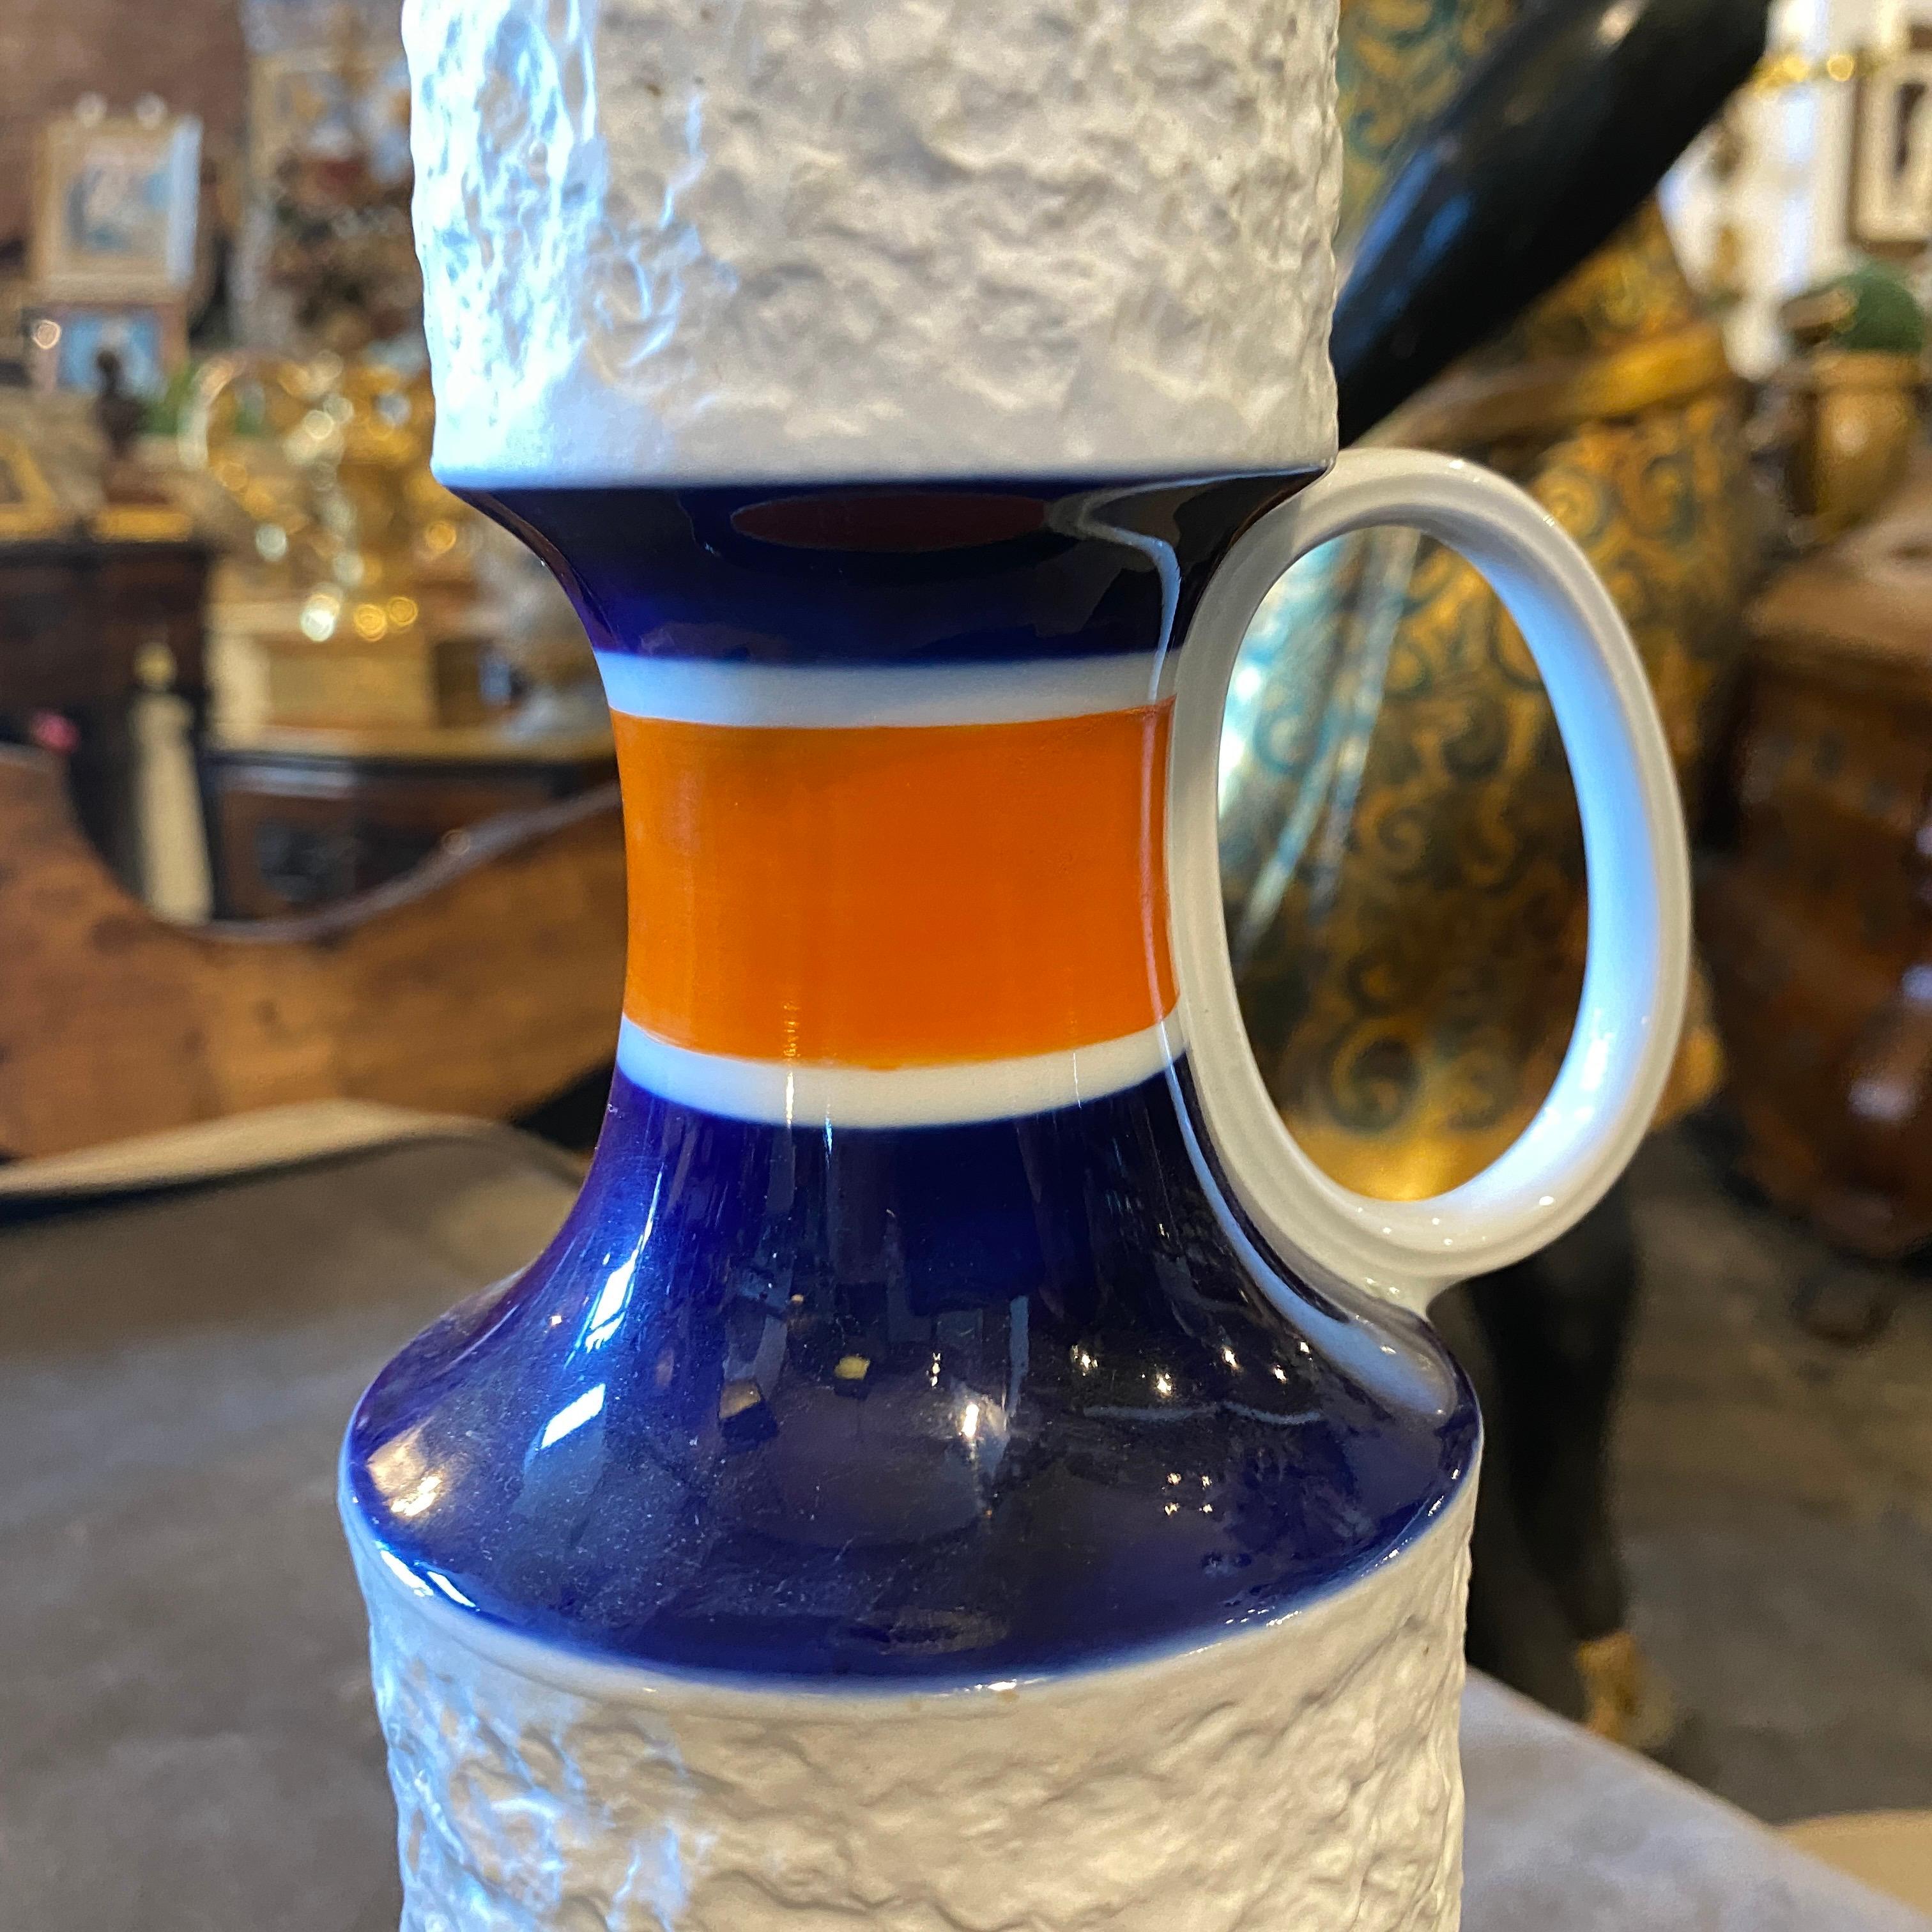 It's a stylish vase made in Germany by K.P.M. White, orange and blue cobalt ceramic it's perfect conditions. This jug by K.P.M. is a striking and contemporary piece that exemplifies the design trends of the 1970s Modernist movement. K.P.M.  is a